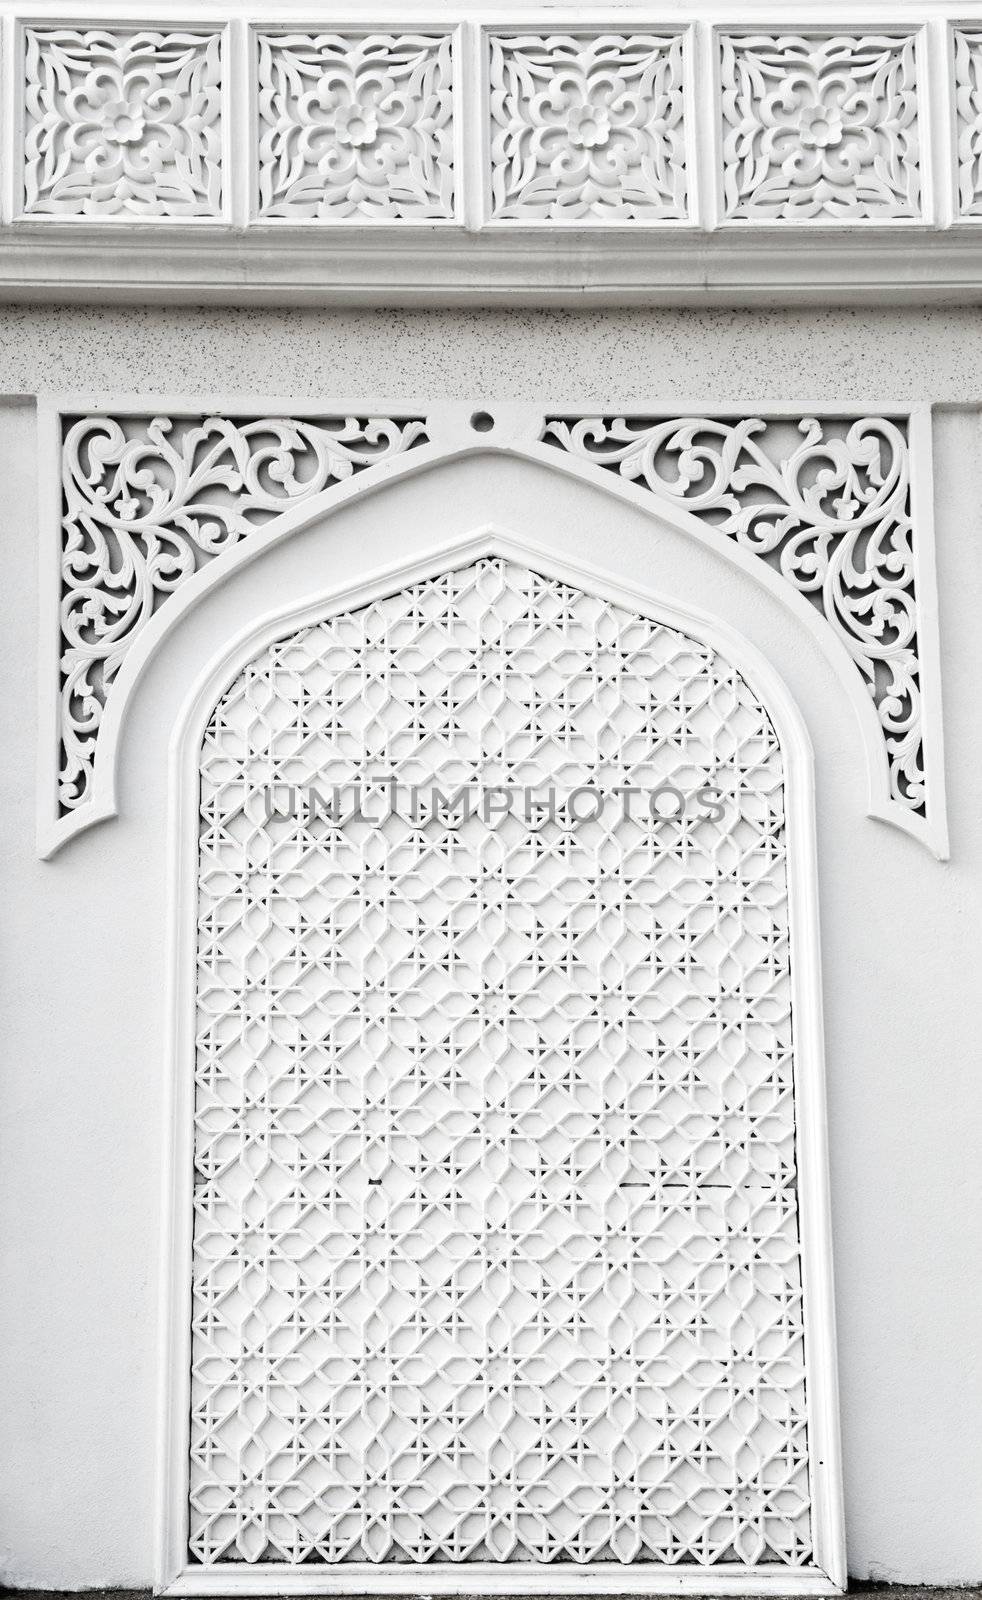 An example of Islamic mosque design cast in concrete on a building in Terengganu, Malaysia.